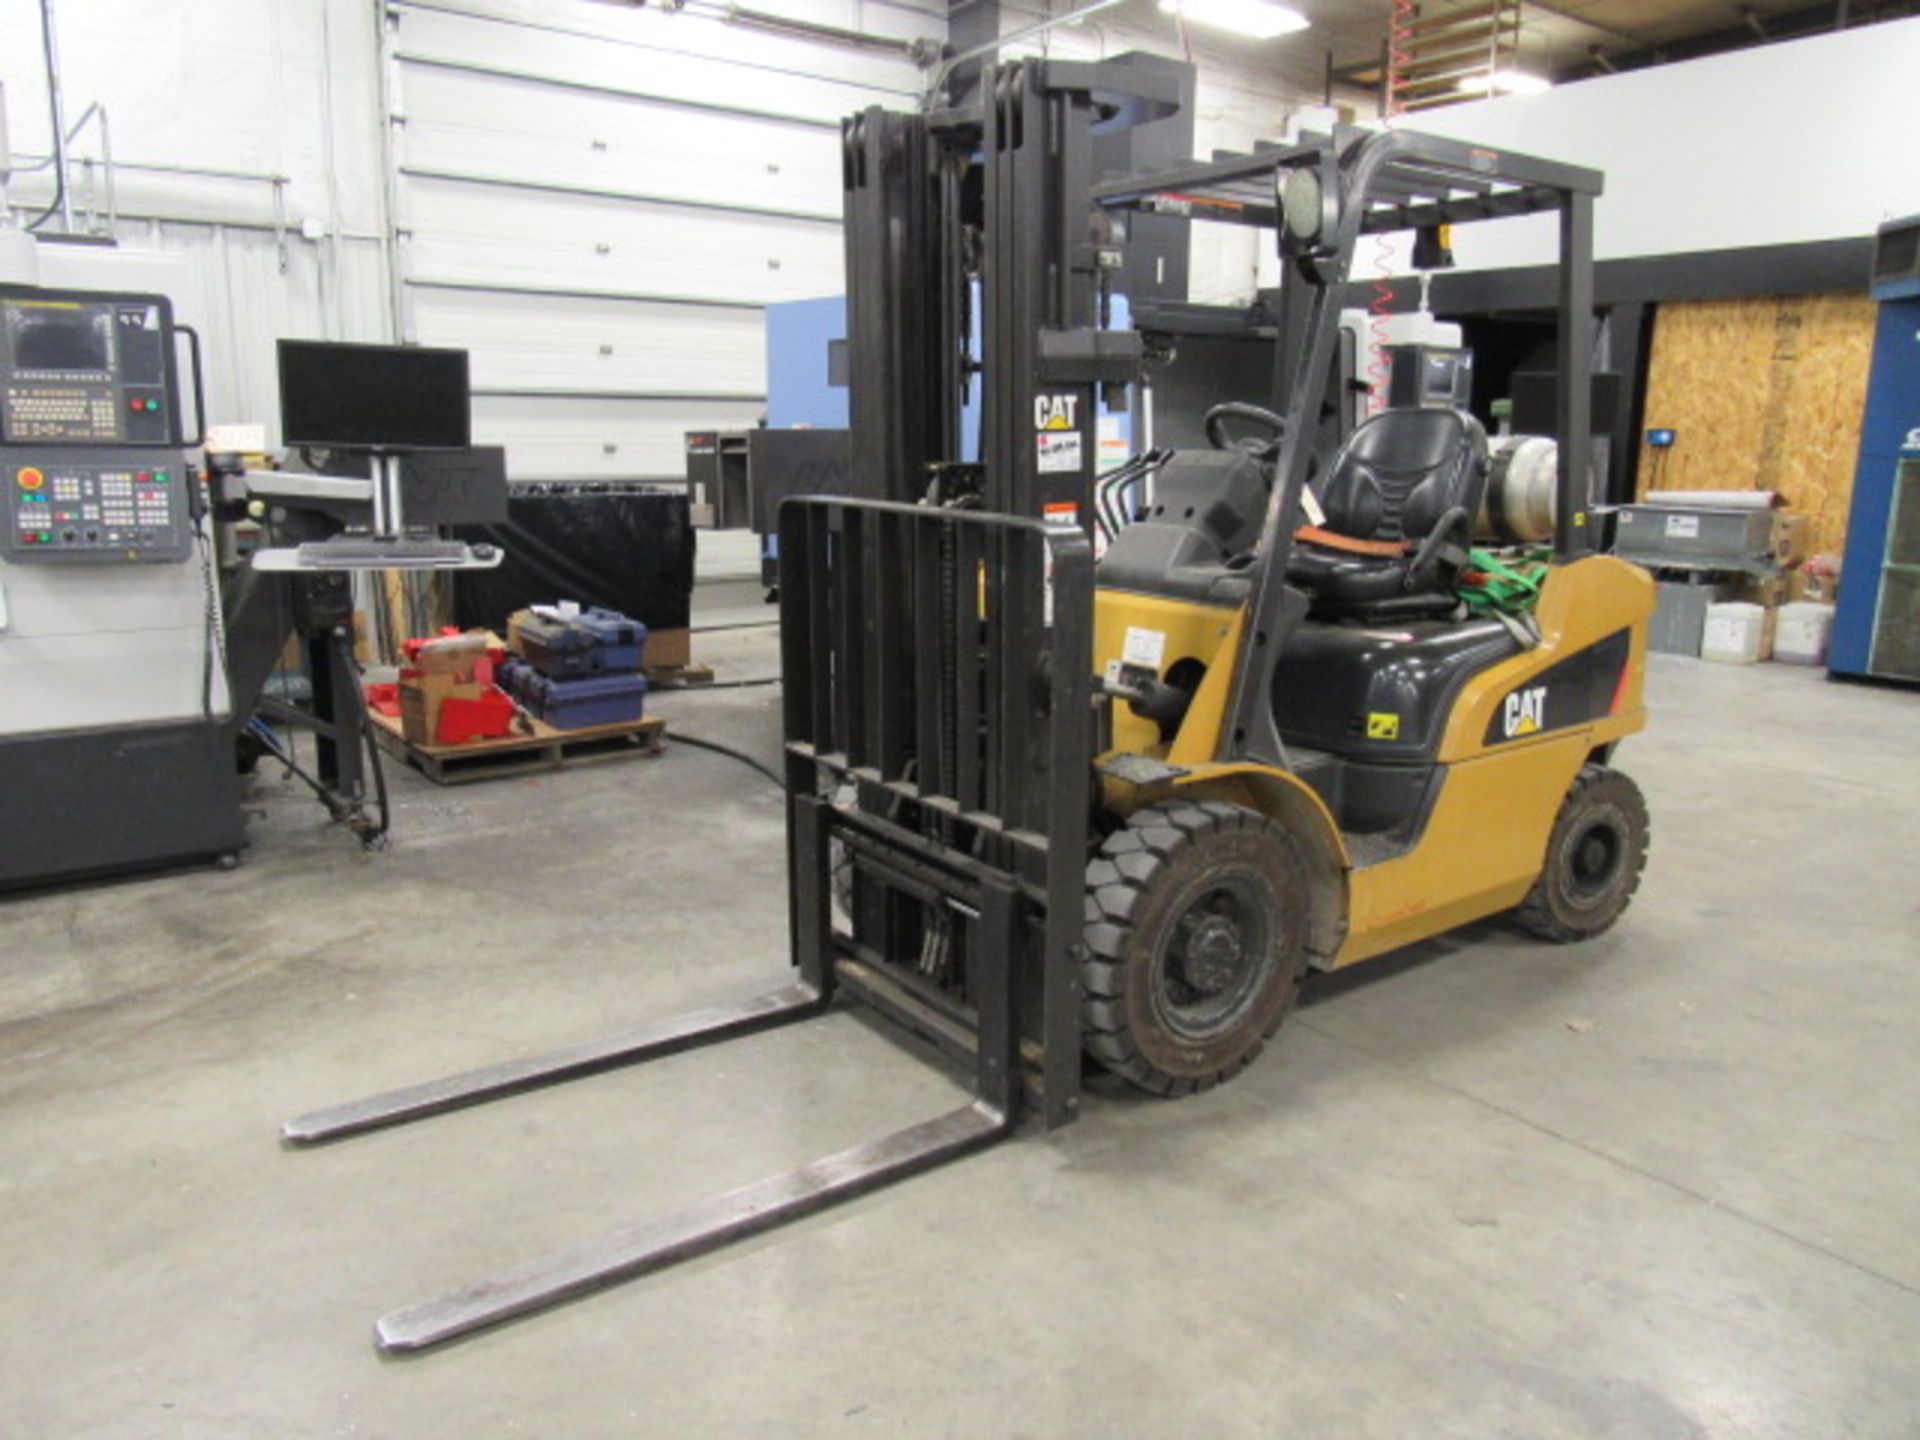 CAT Model 2P5000 5,000 lb. Capacity LP Forklift with Side Shift, Headlights, Safety Light, Outdoor